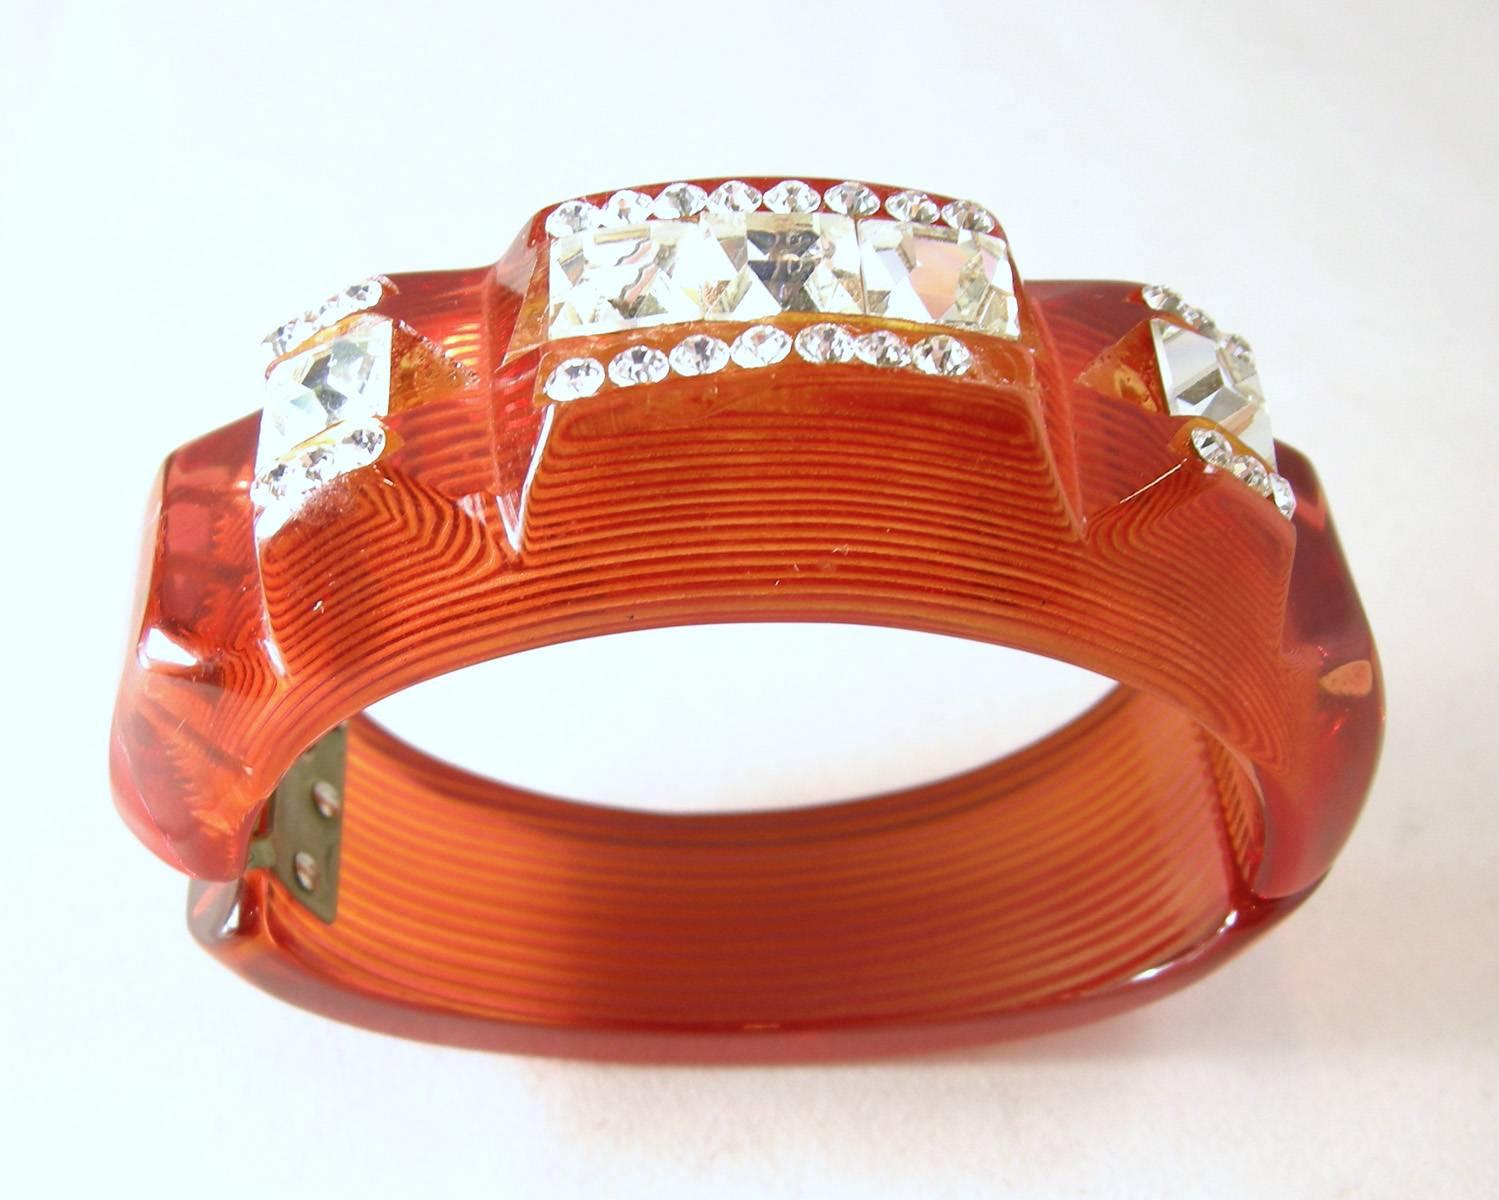 It’s not often one can find this rare red apple juice Bakelite bracelet, especially adorned with bright, glistening crystals in the center and the sides.  It is just magnificent.  It is 1” high and 6” inside.  It is a clamper bracelet and in